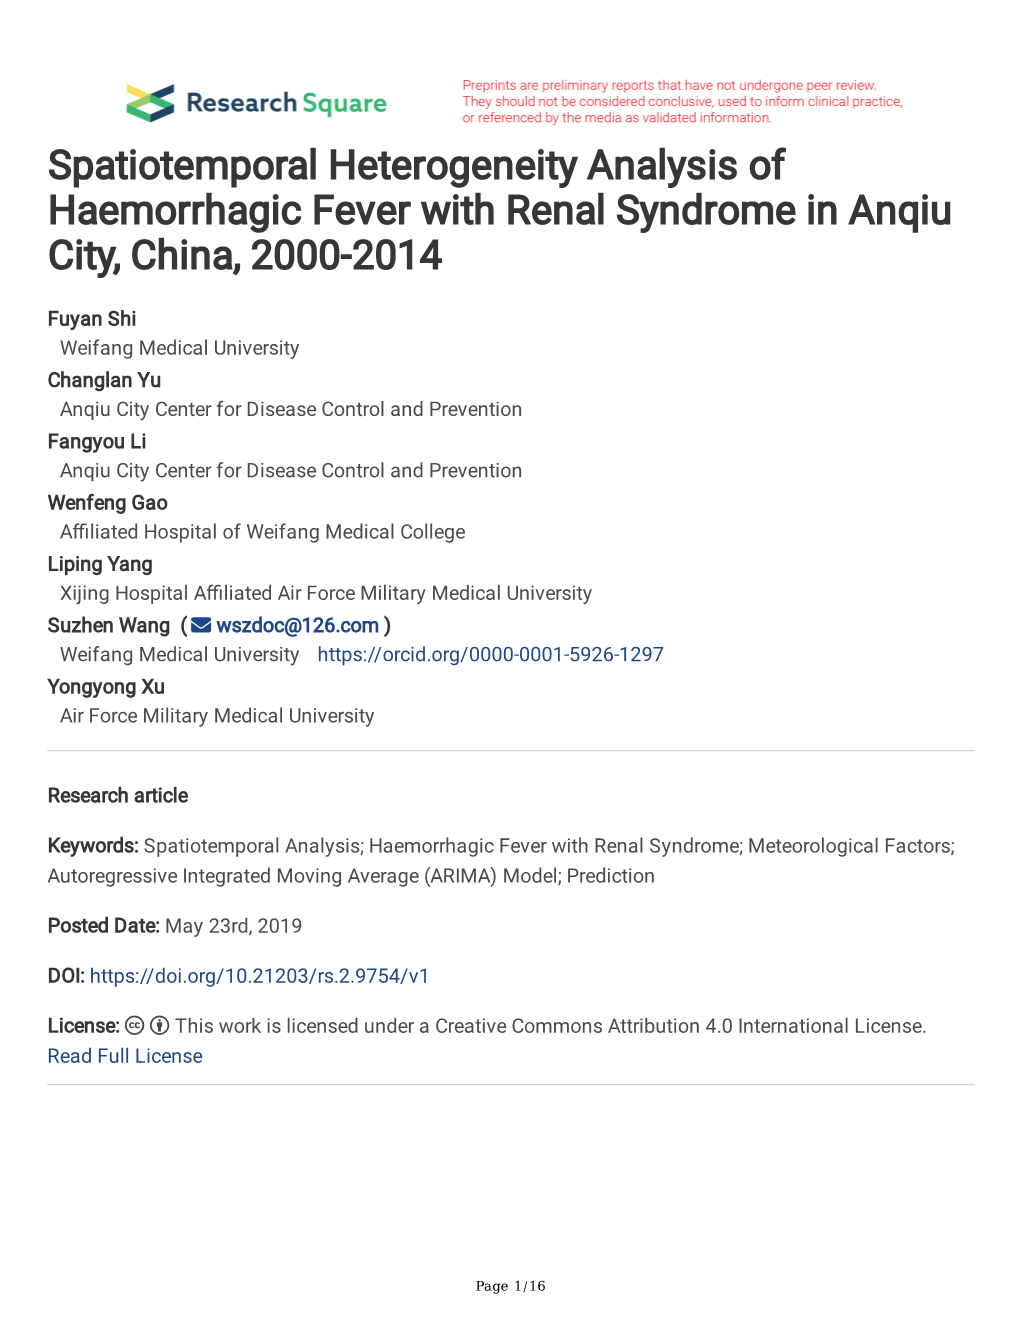 Spatiotemporal Heterogeneity Analysis of Haemorrhagic Fever with Renal Syndrome in Anqiu City, China, 2000-2014